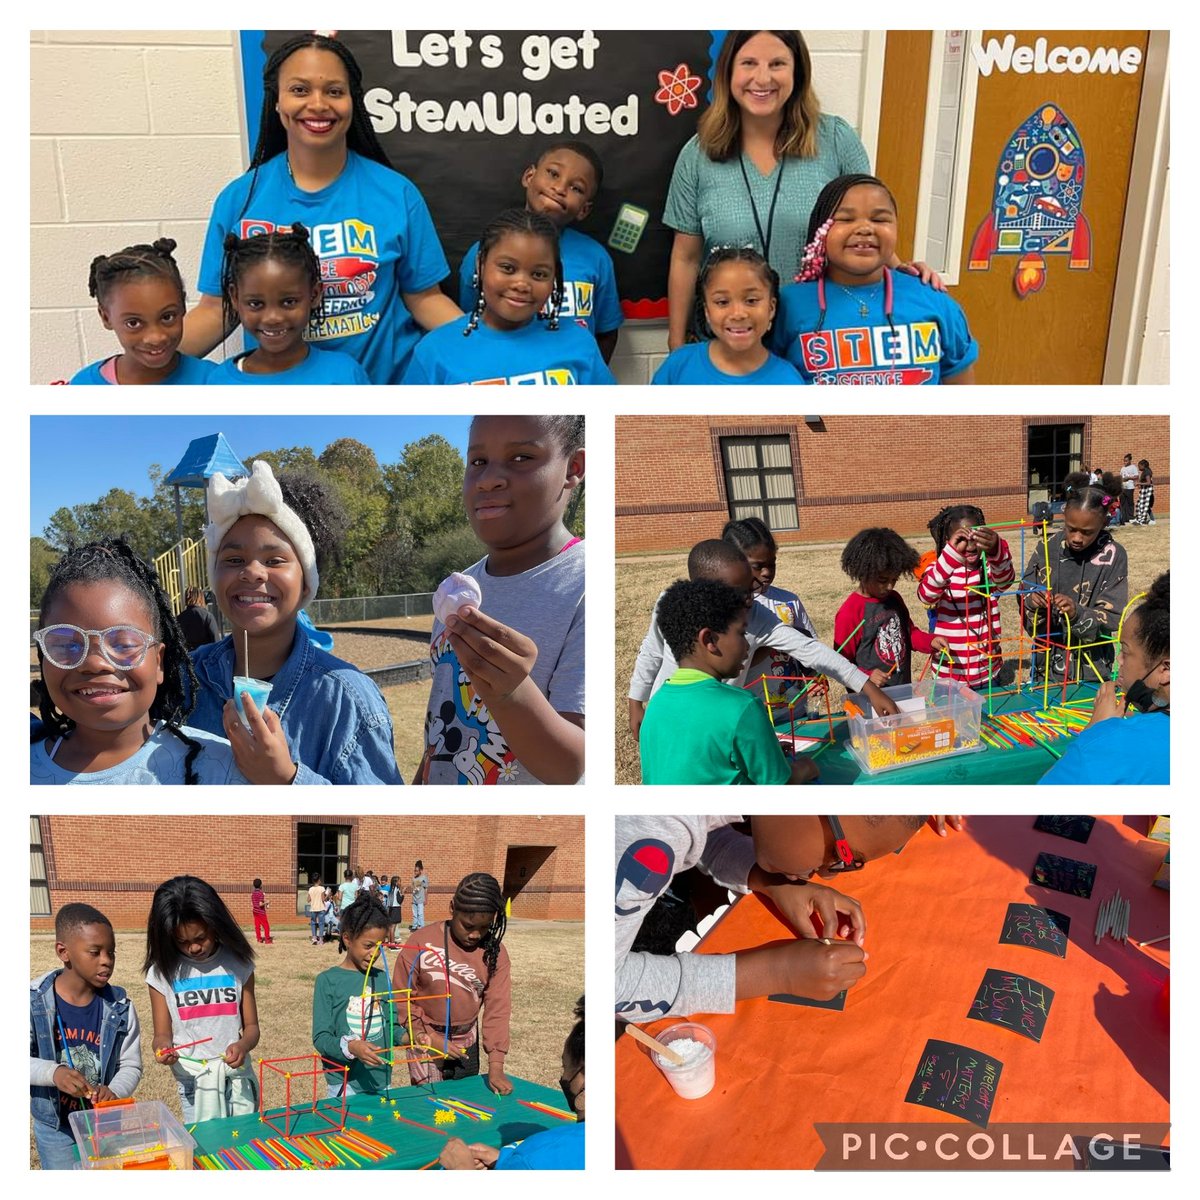 Our students had a STEMulating Day! We celebrated STEM Day, PBIS DIVE behavior, and wrote kindness notes at The Lakes💙🐬
@WLE_HCS @jodyercallaway @QuaviousWright 
#winning4kids #STEMeducation #STEMDay